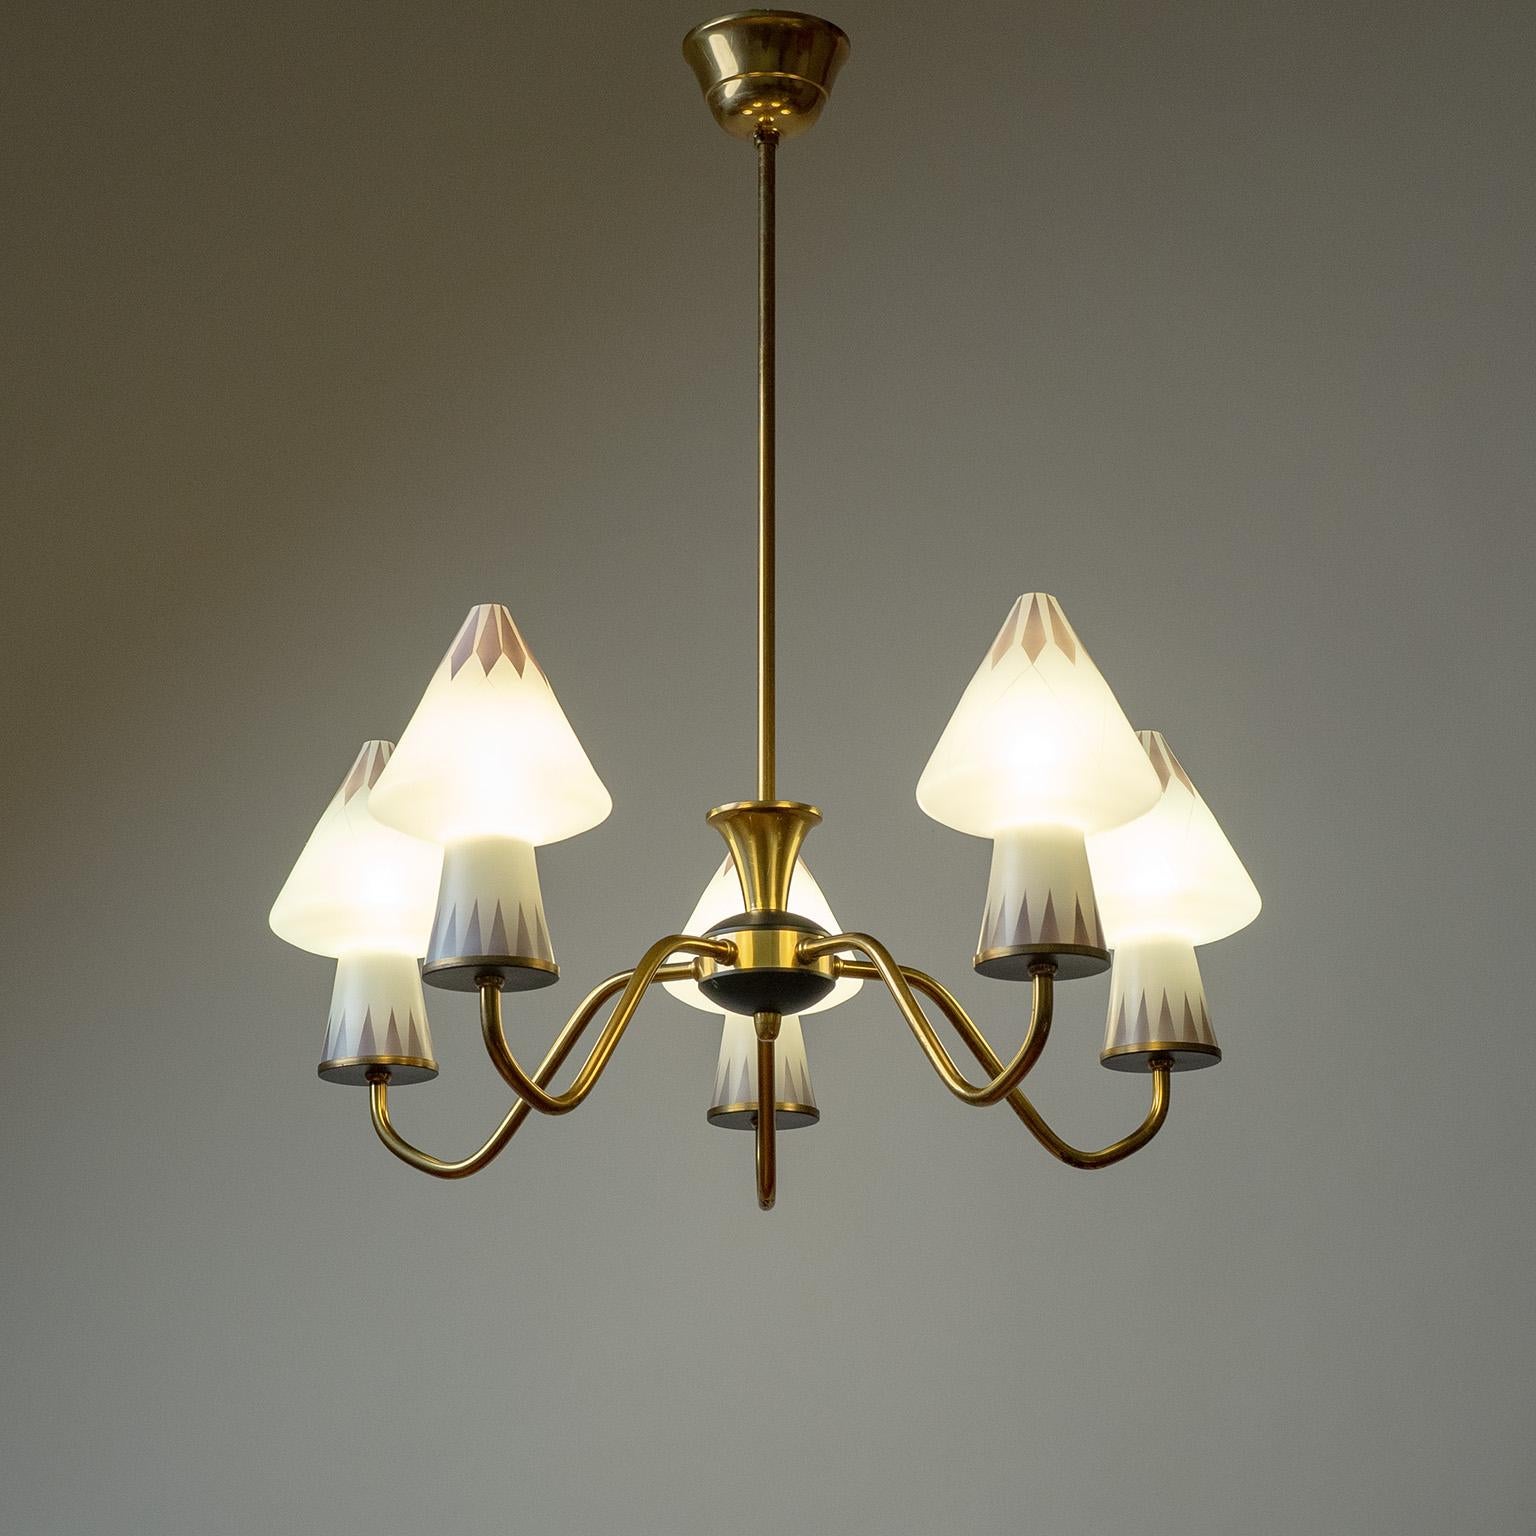 Mid-20th Century Swedish Enameled Glass Chandelier, 1950s For Sale